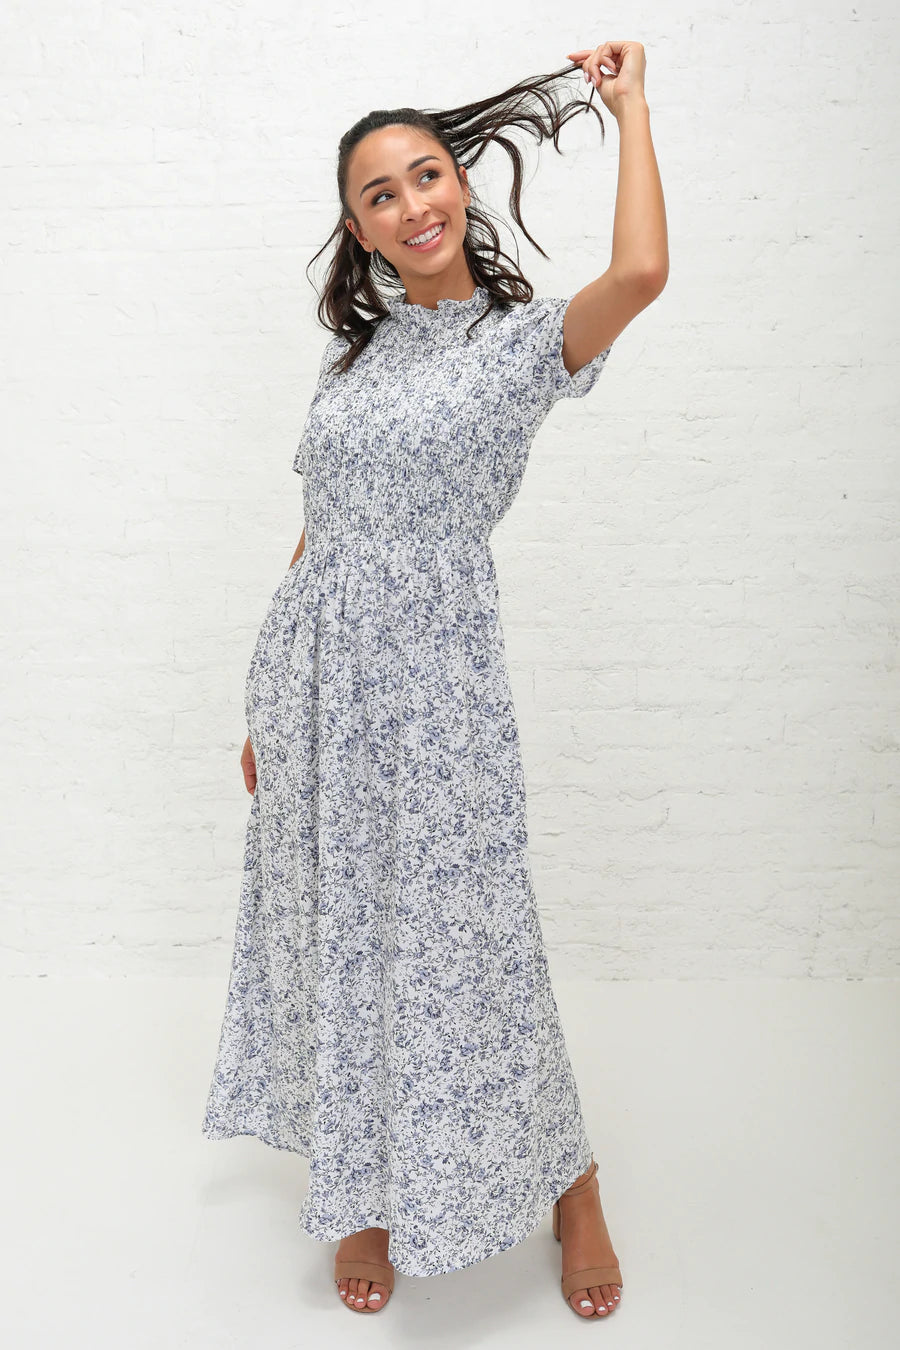 Faded Blue Floral Modest Dress ...